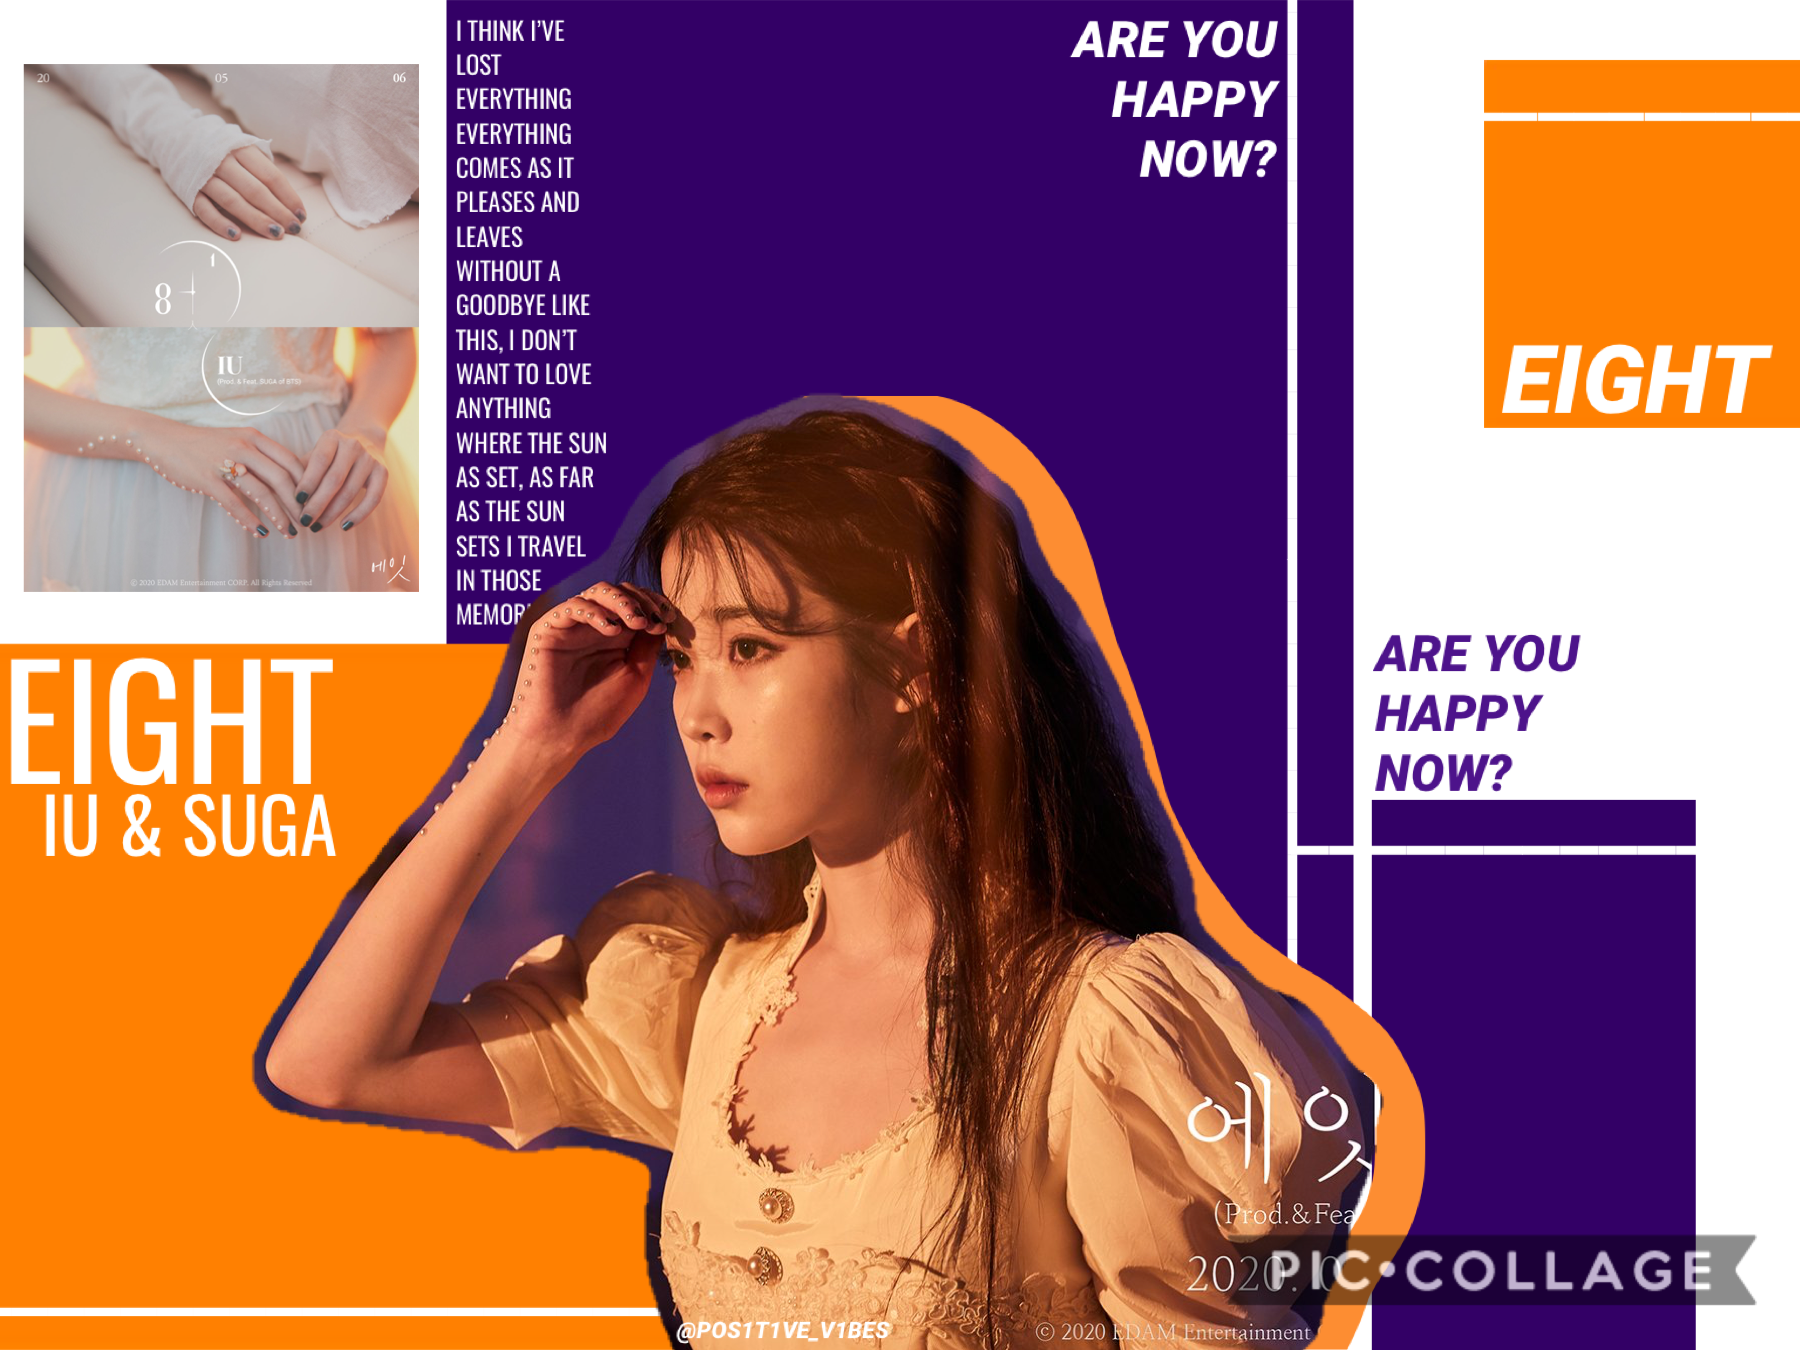 【discarded edit #11】
i’m in love with IU’s new song but it’s so sad 🥺
this is all over the place but haha that’s why it’s on my extras 🤪
“eight” & “stay tonight” are playing on my playlist 24/7 
totally inspired by @moonjoon !!~ 
